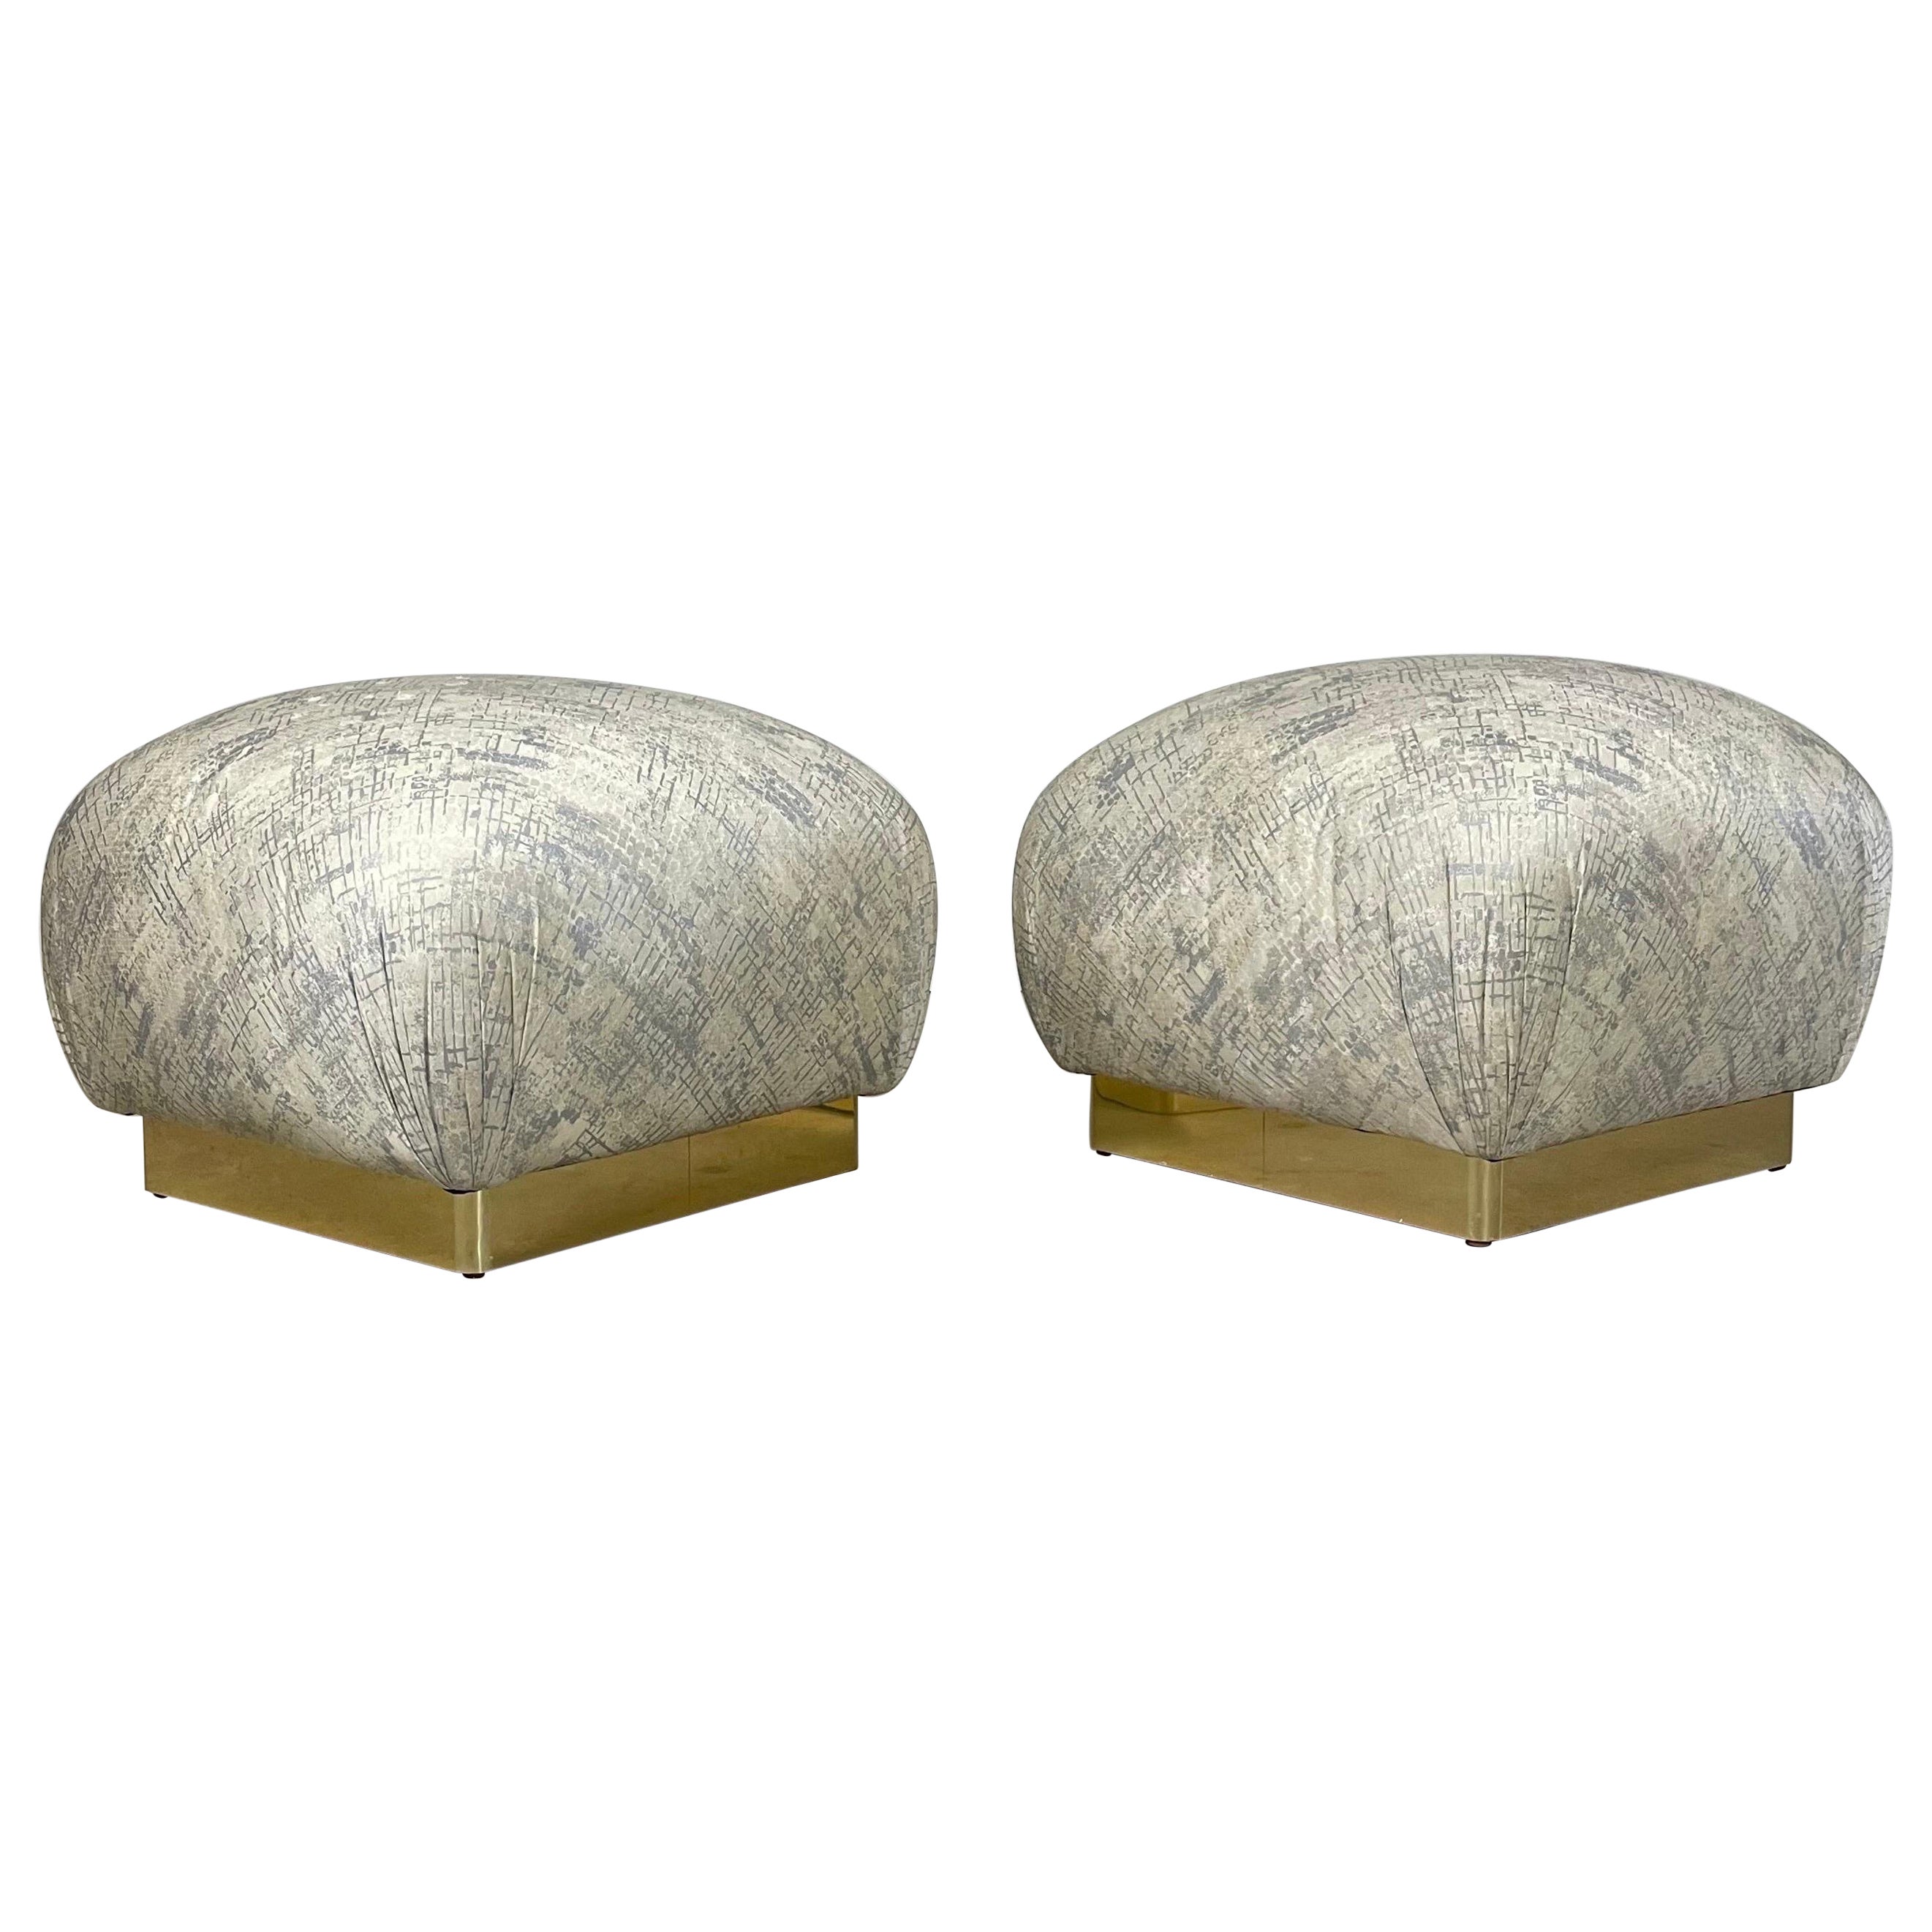 Pair of Brass Souffle Ottomans by Karl Springer